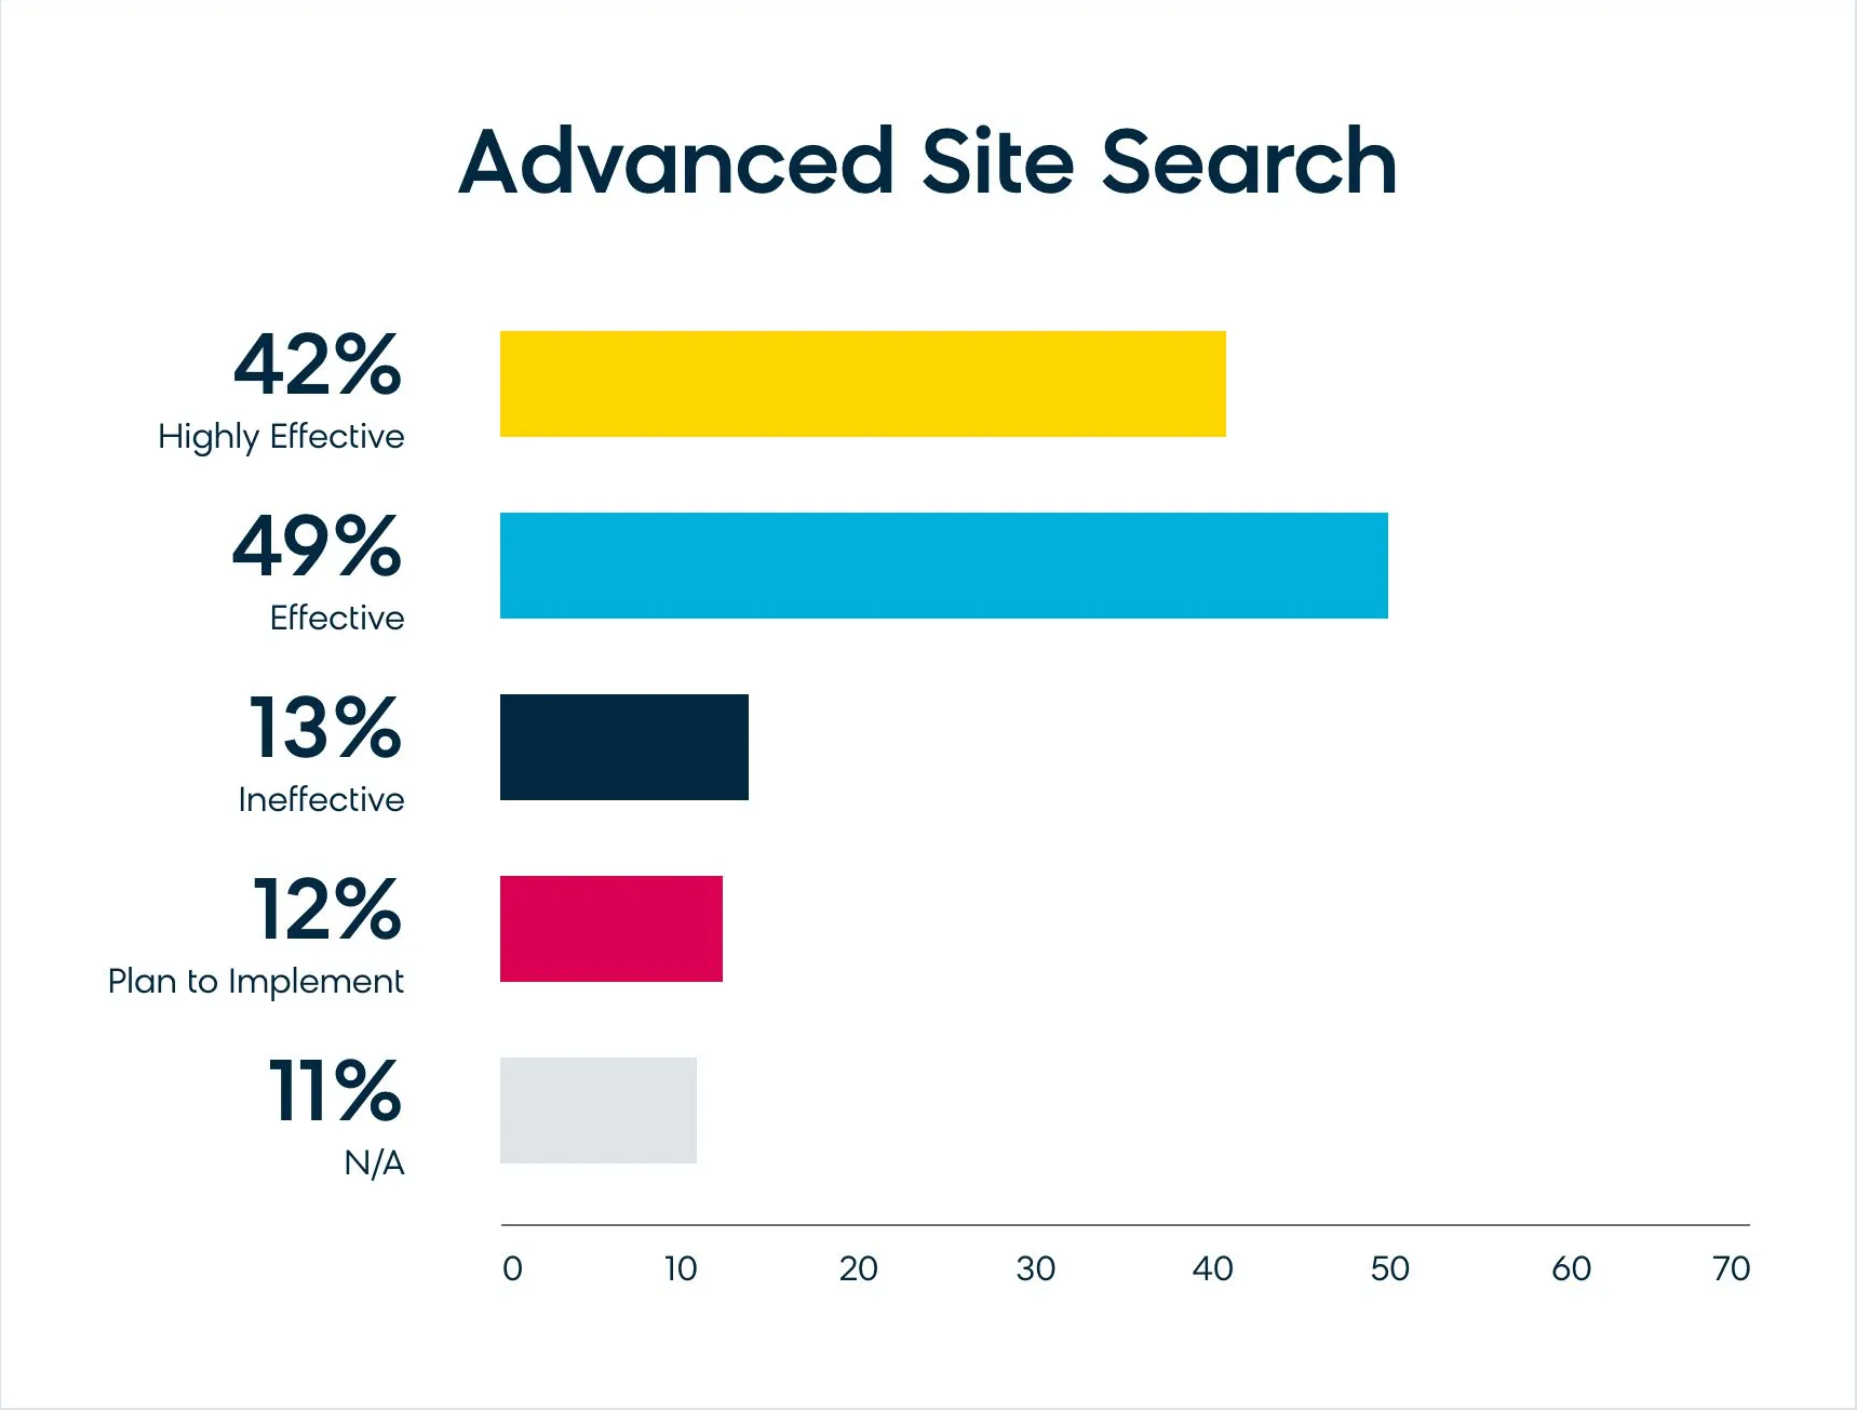 Survey of Effectiveness of Advanced Site Search